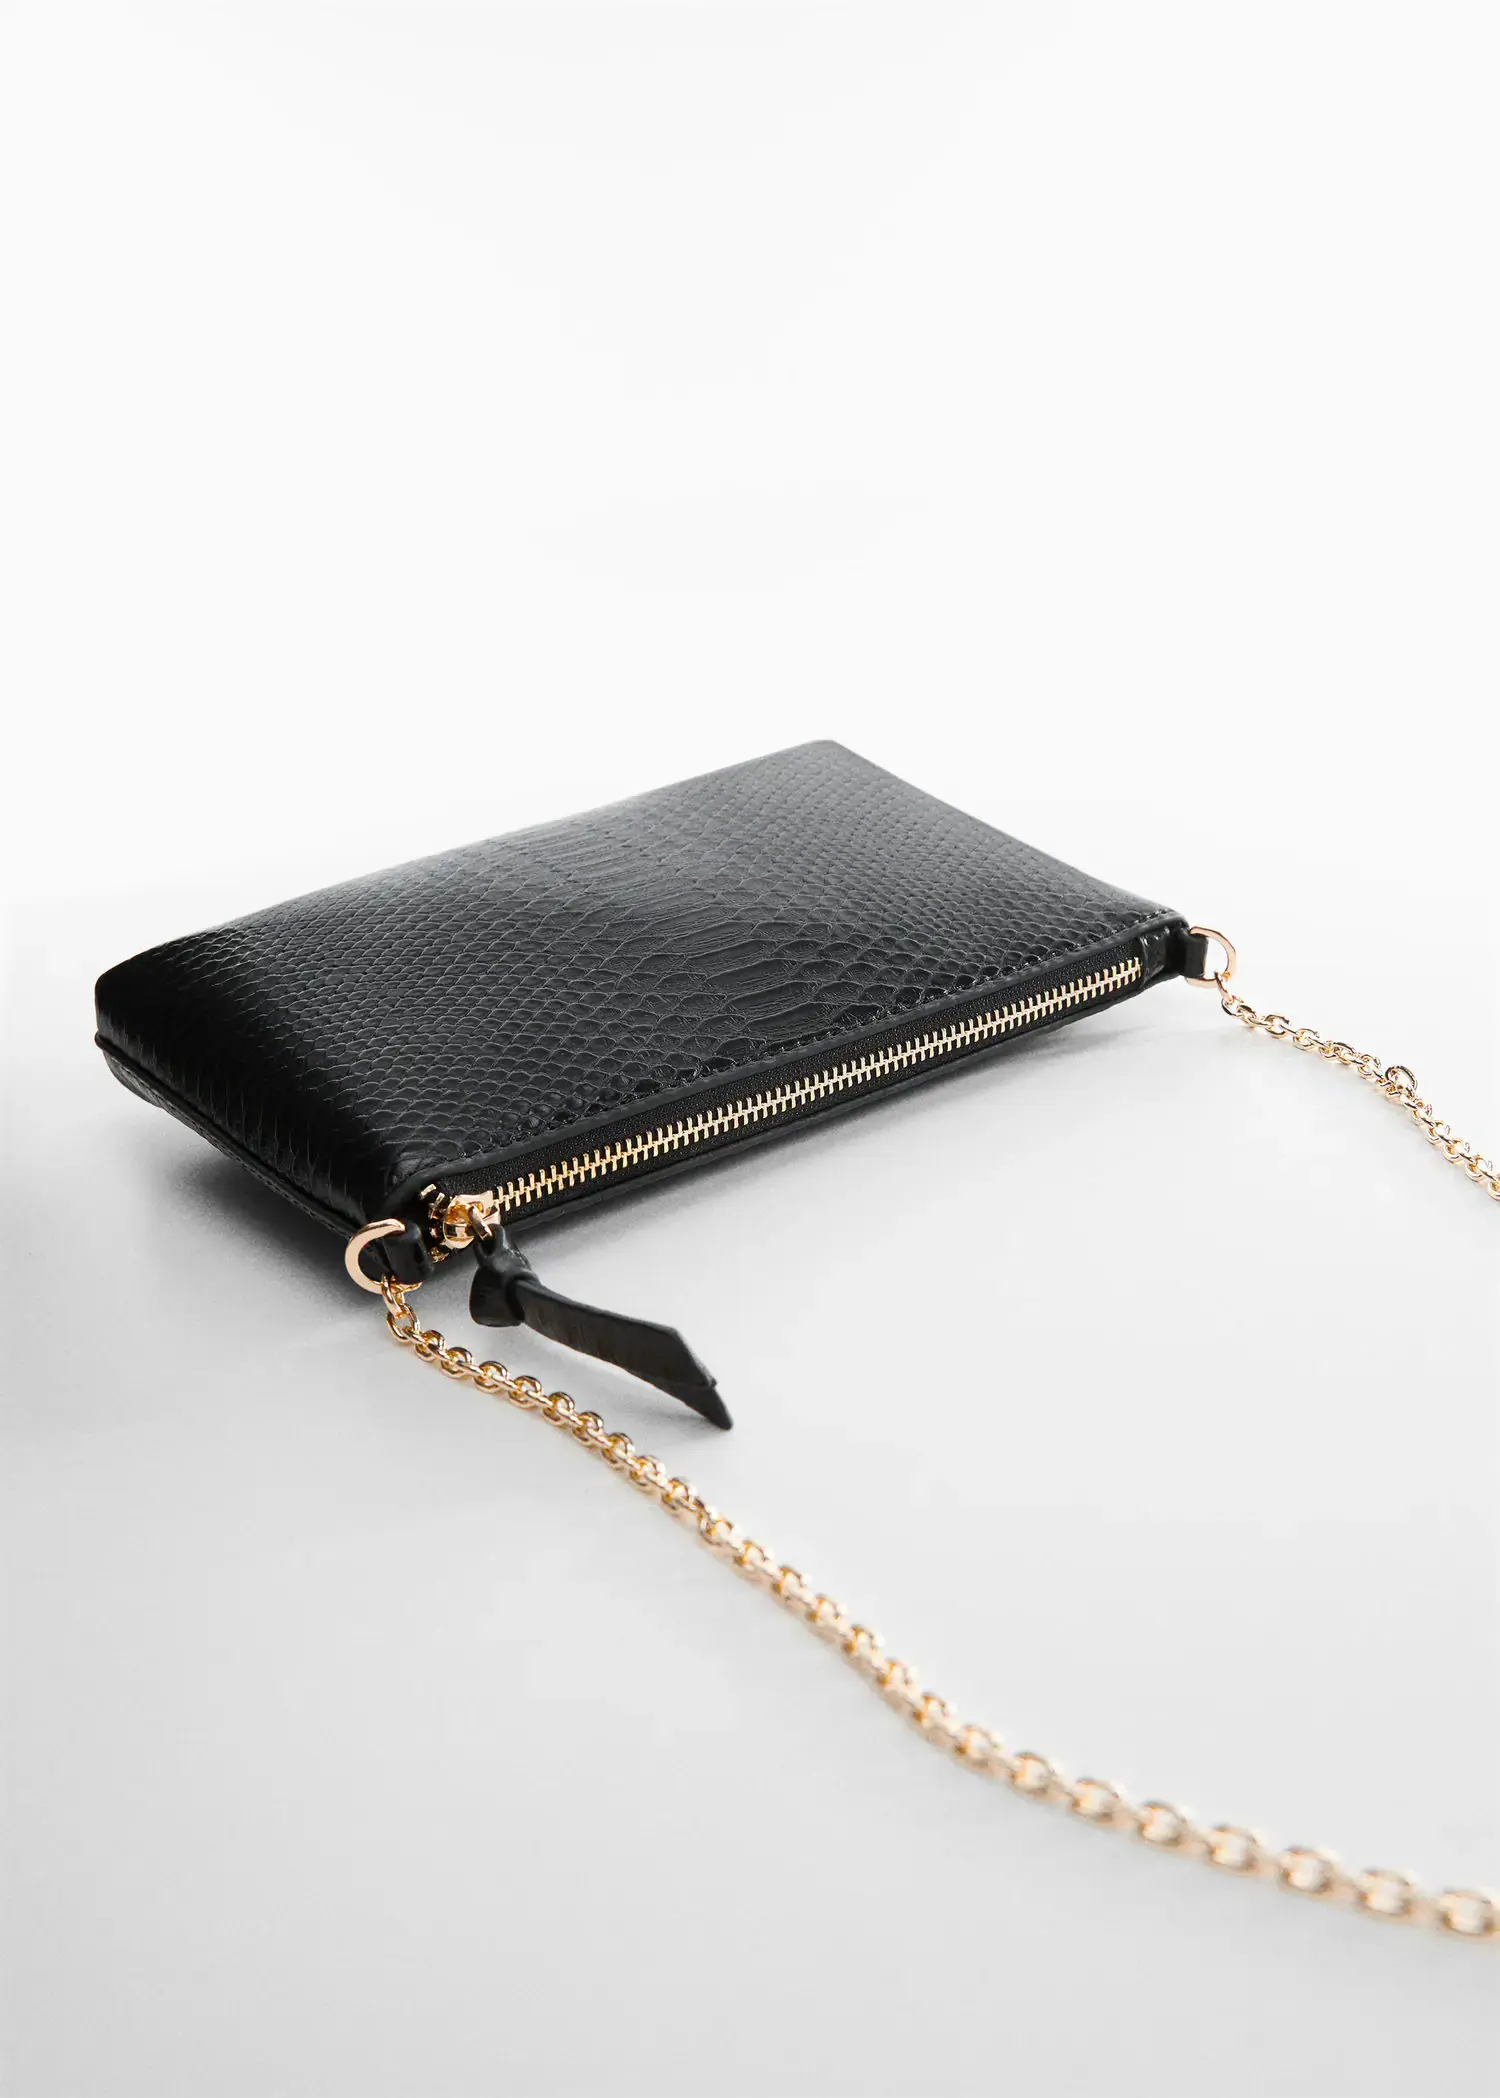 Mango Coco chain bag. a black purse with a gold chain on a table. 